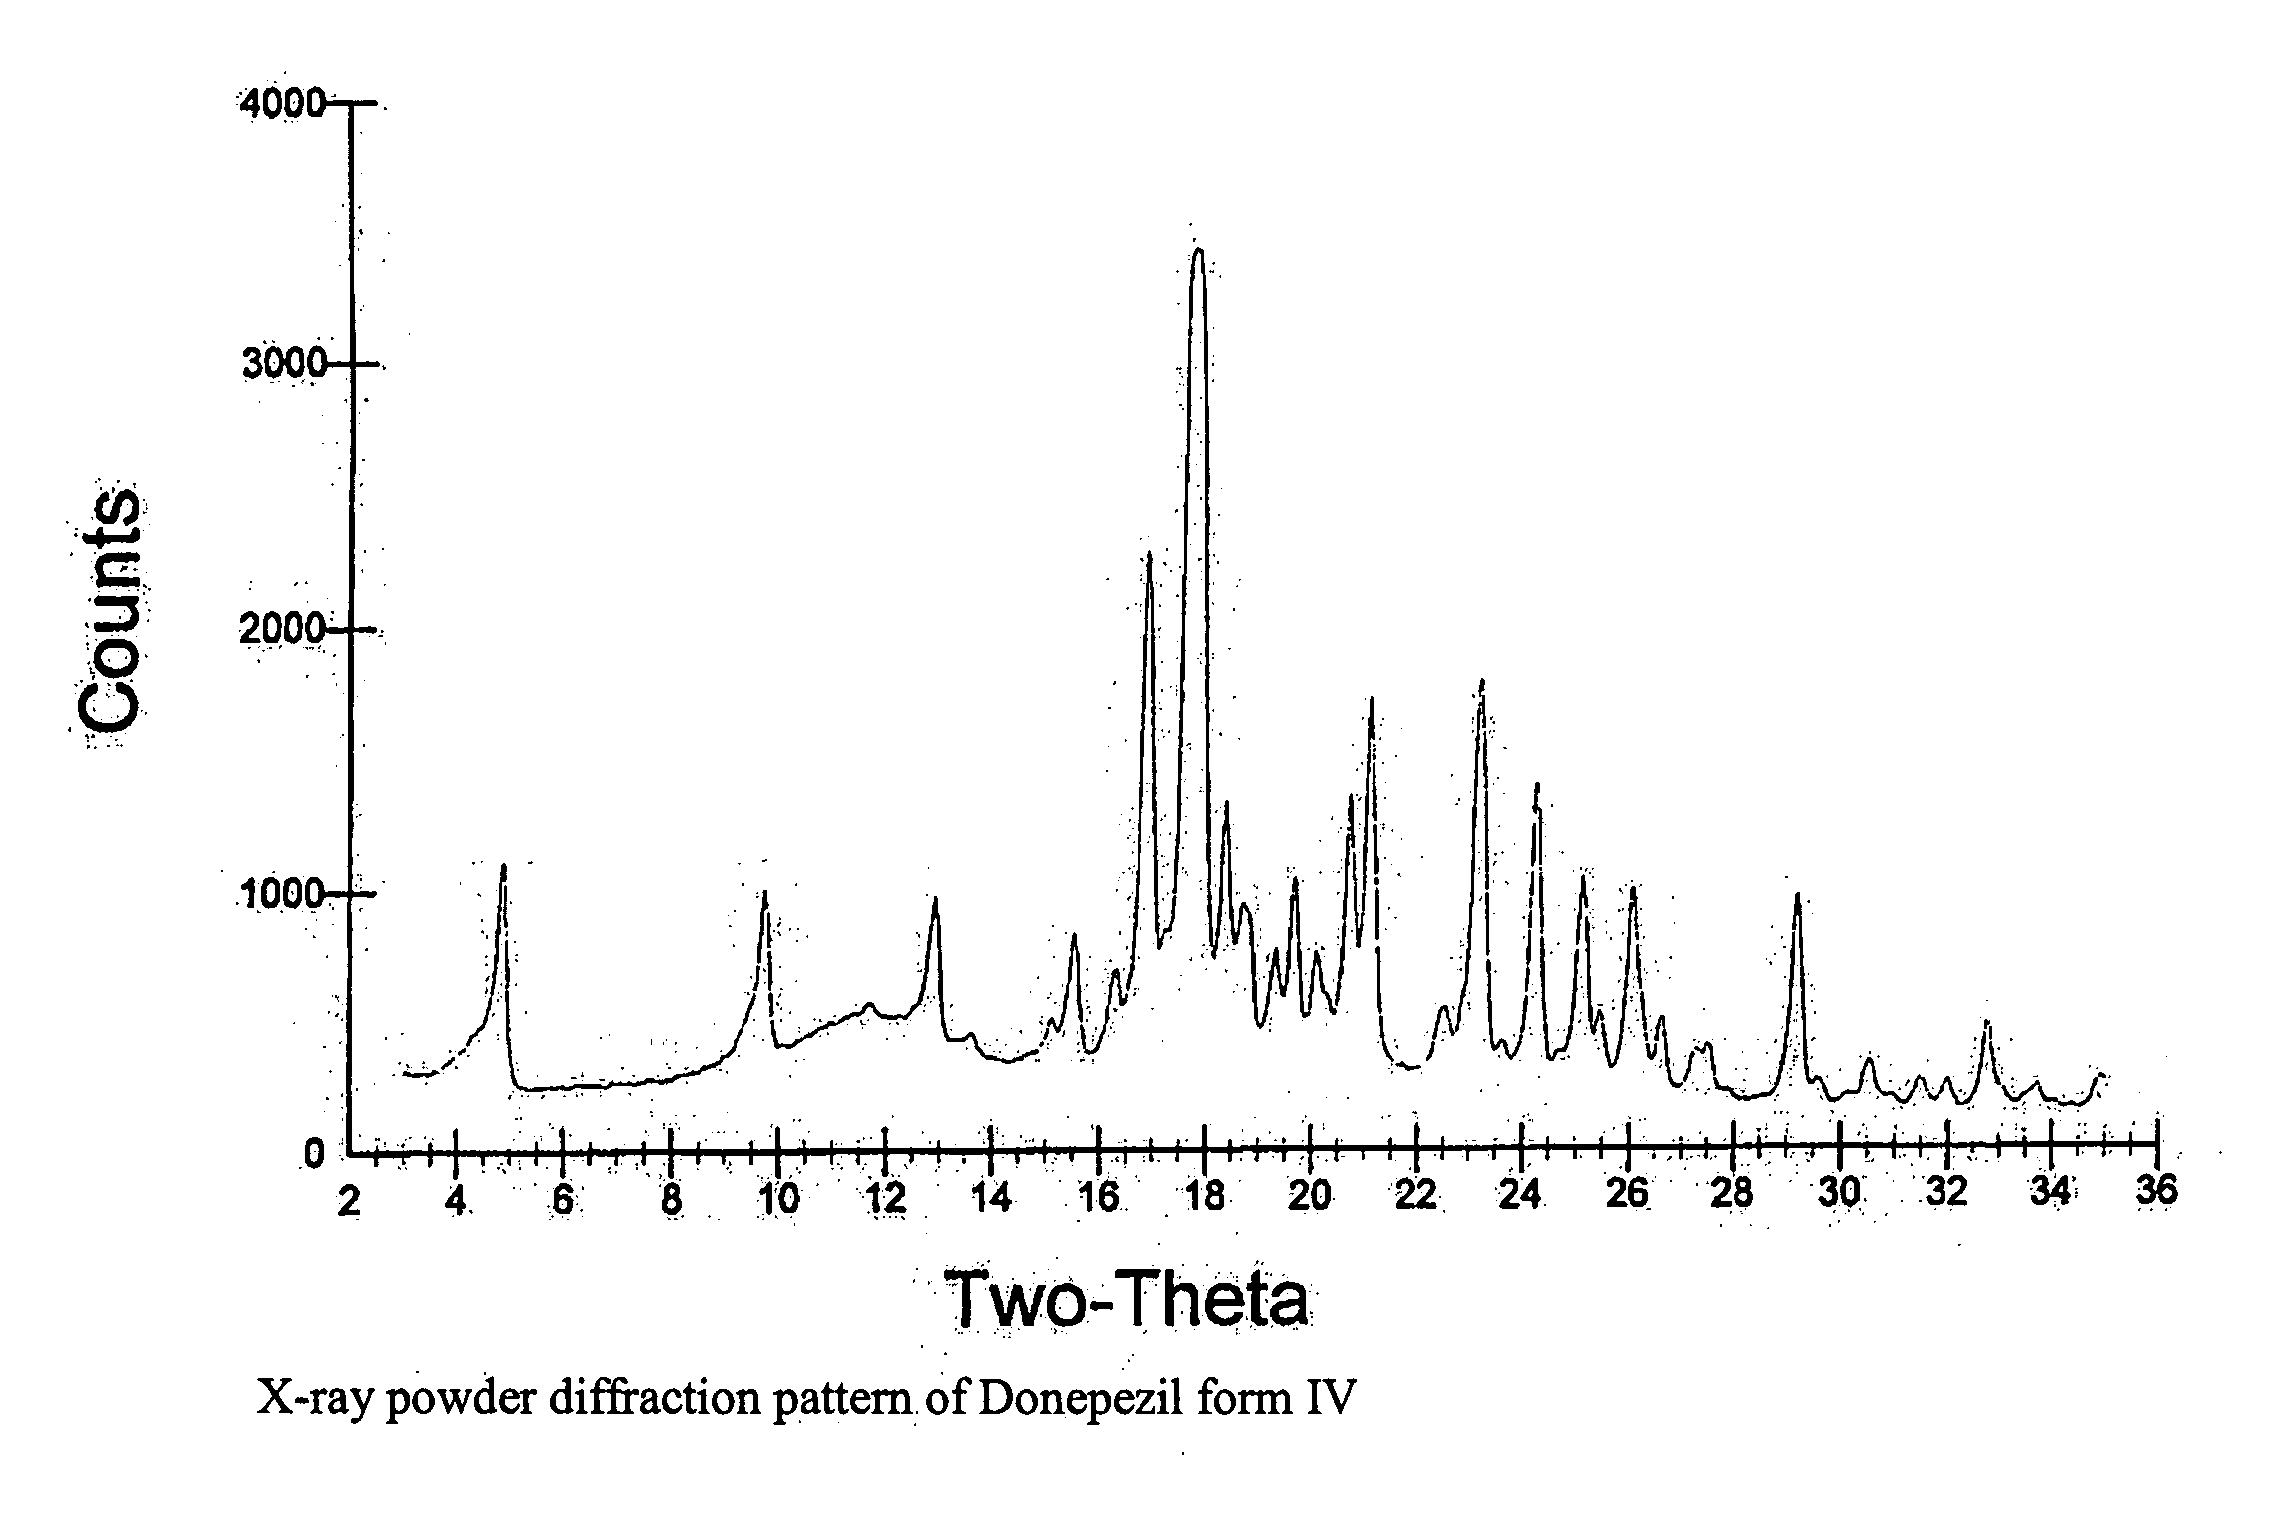 Crystalline forms of Donepezil base